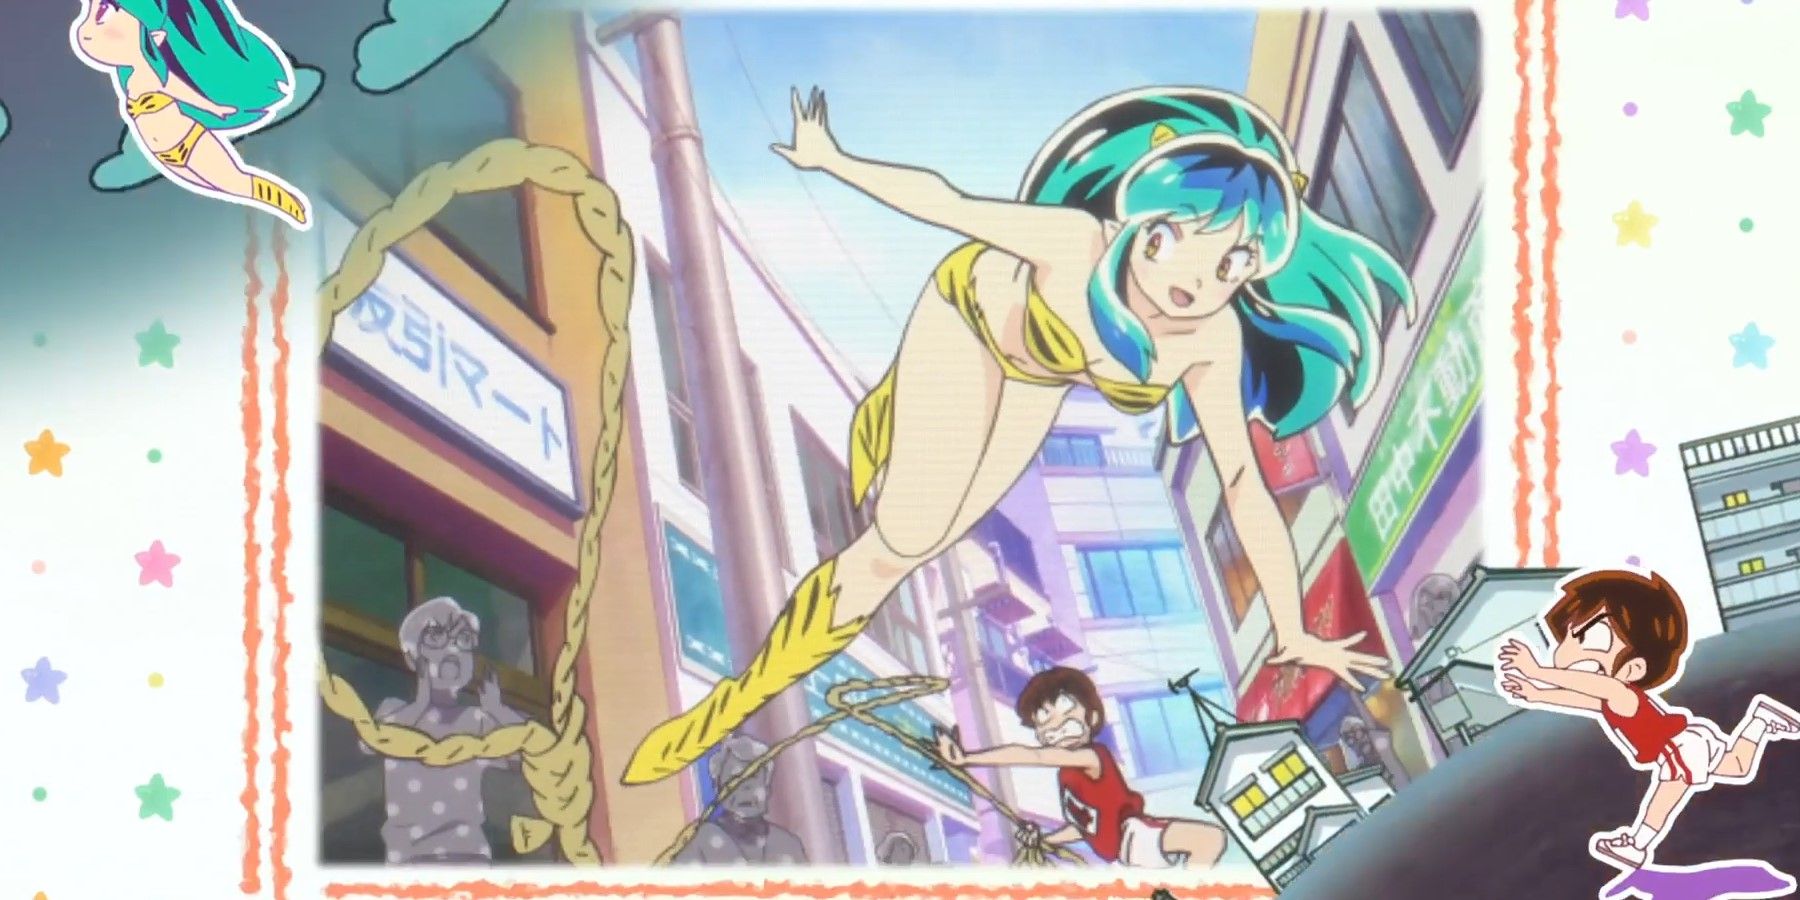 E1 Chase Montage of Ataru trying to catch Lum